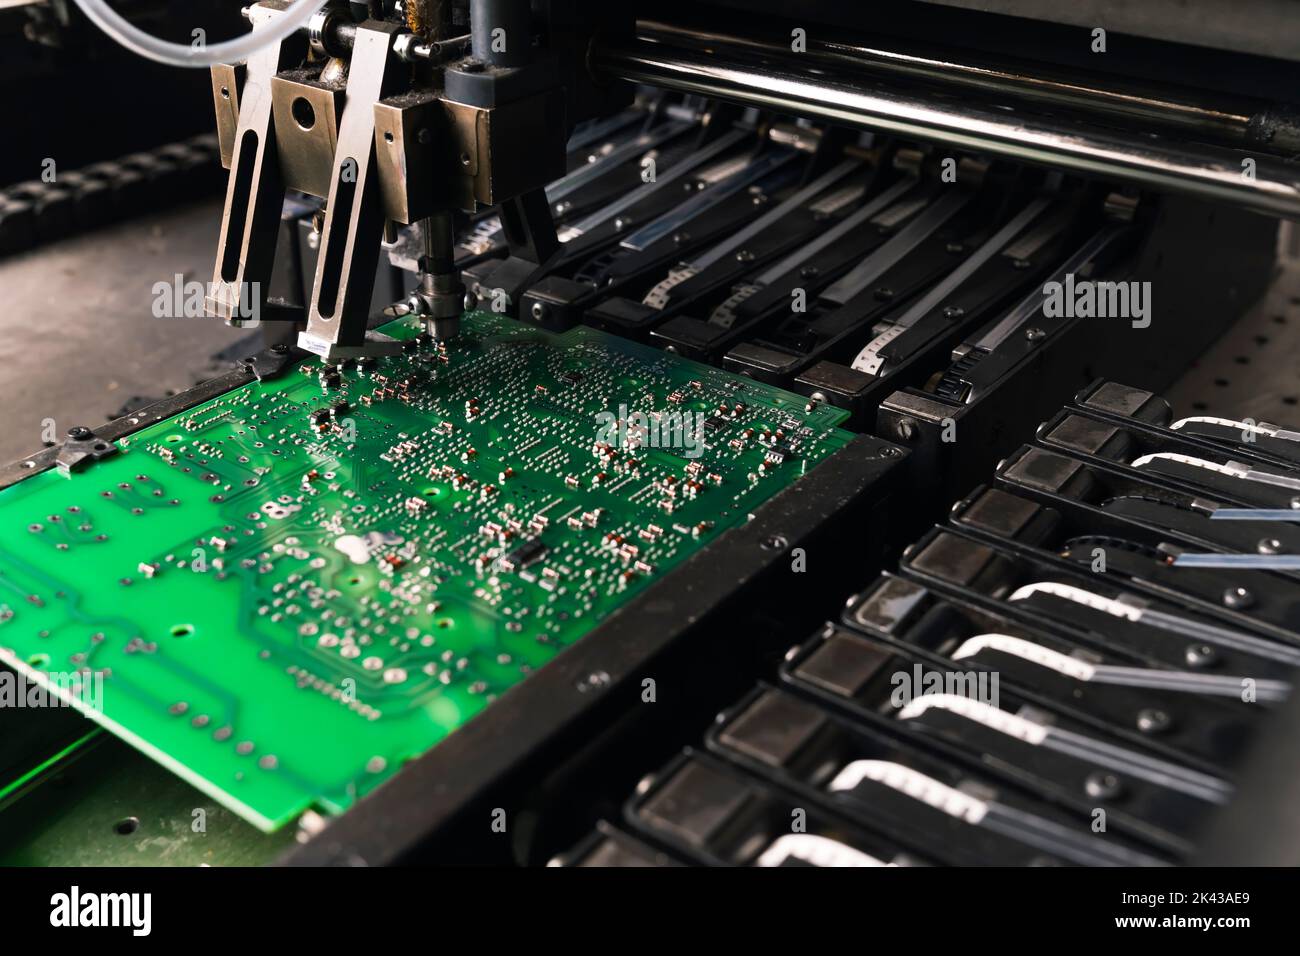 Close-up shot of SMD surface-mount device working on printed circuit board PCB. Assembling electrical components. Precision technology. Horizontal Stock Photo